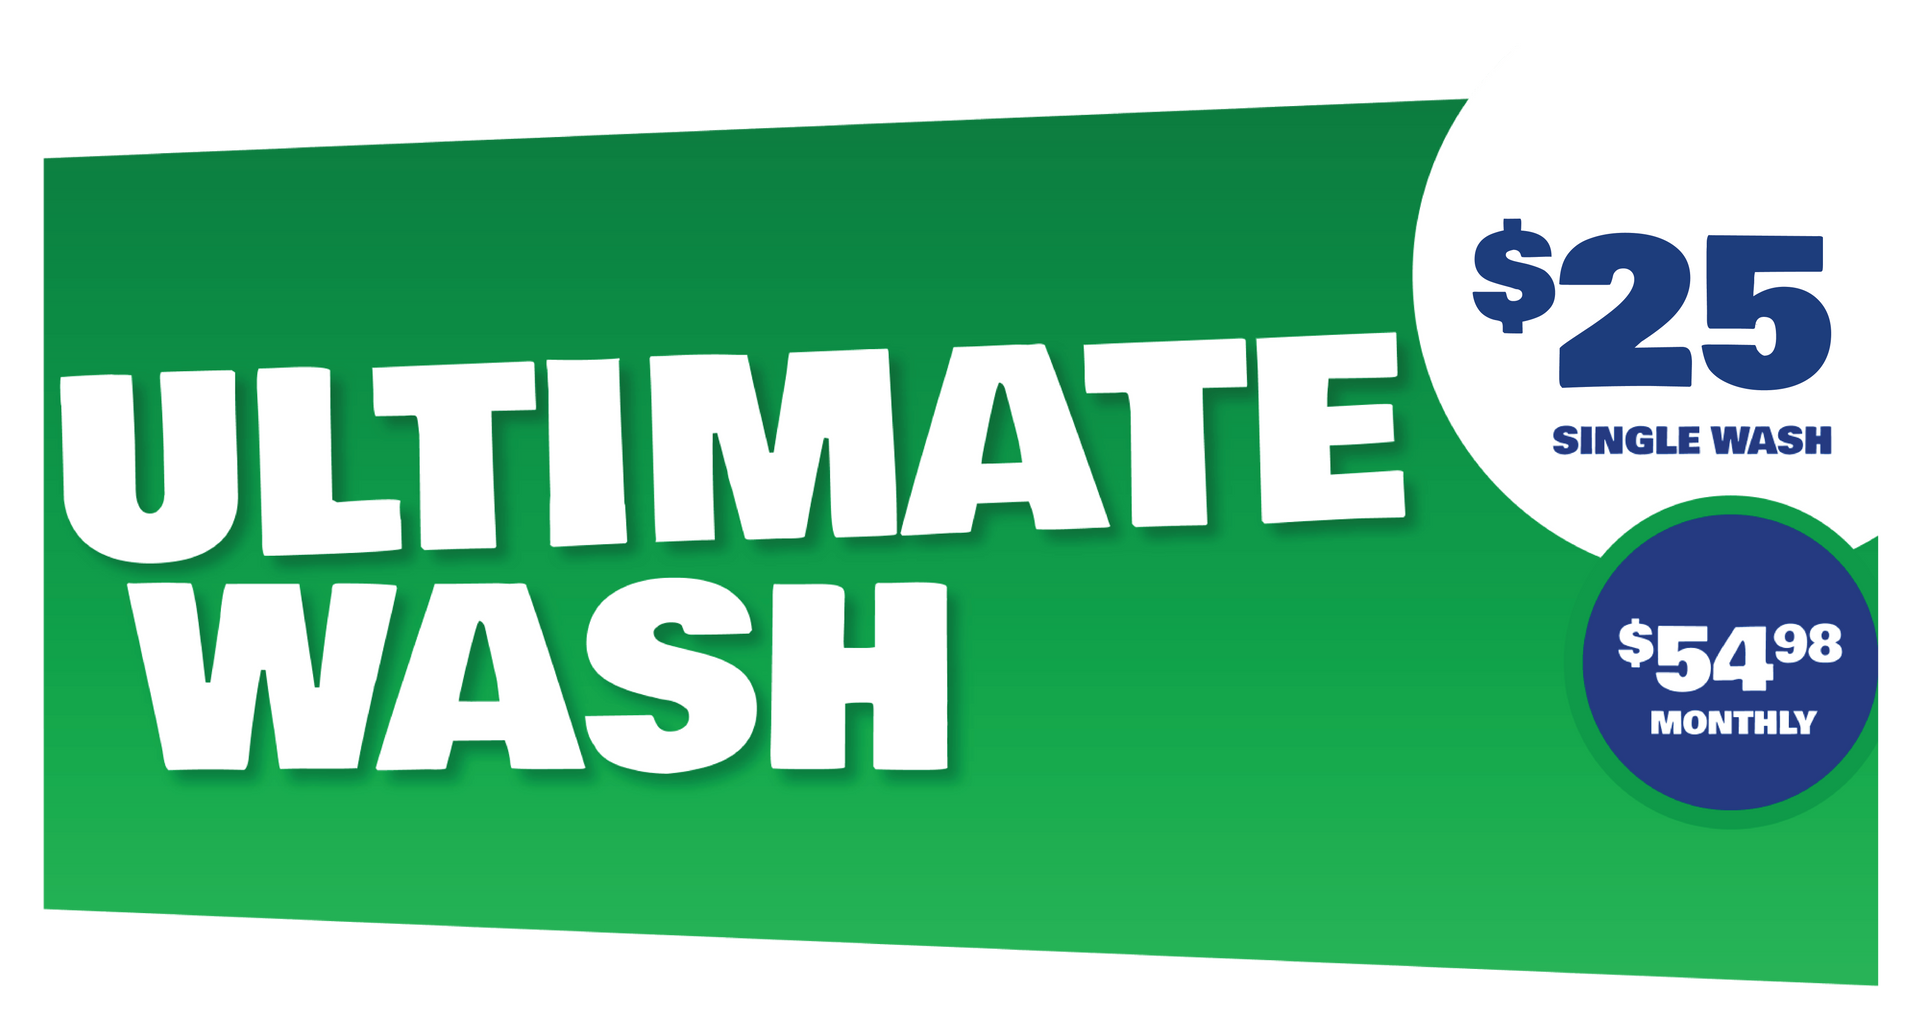 Ultimate Wash Package $20 per wash or $54.98 monthly